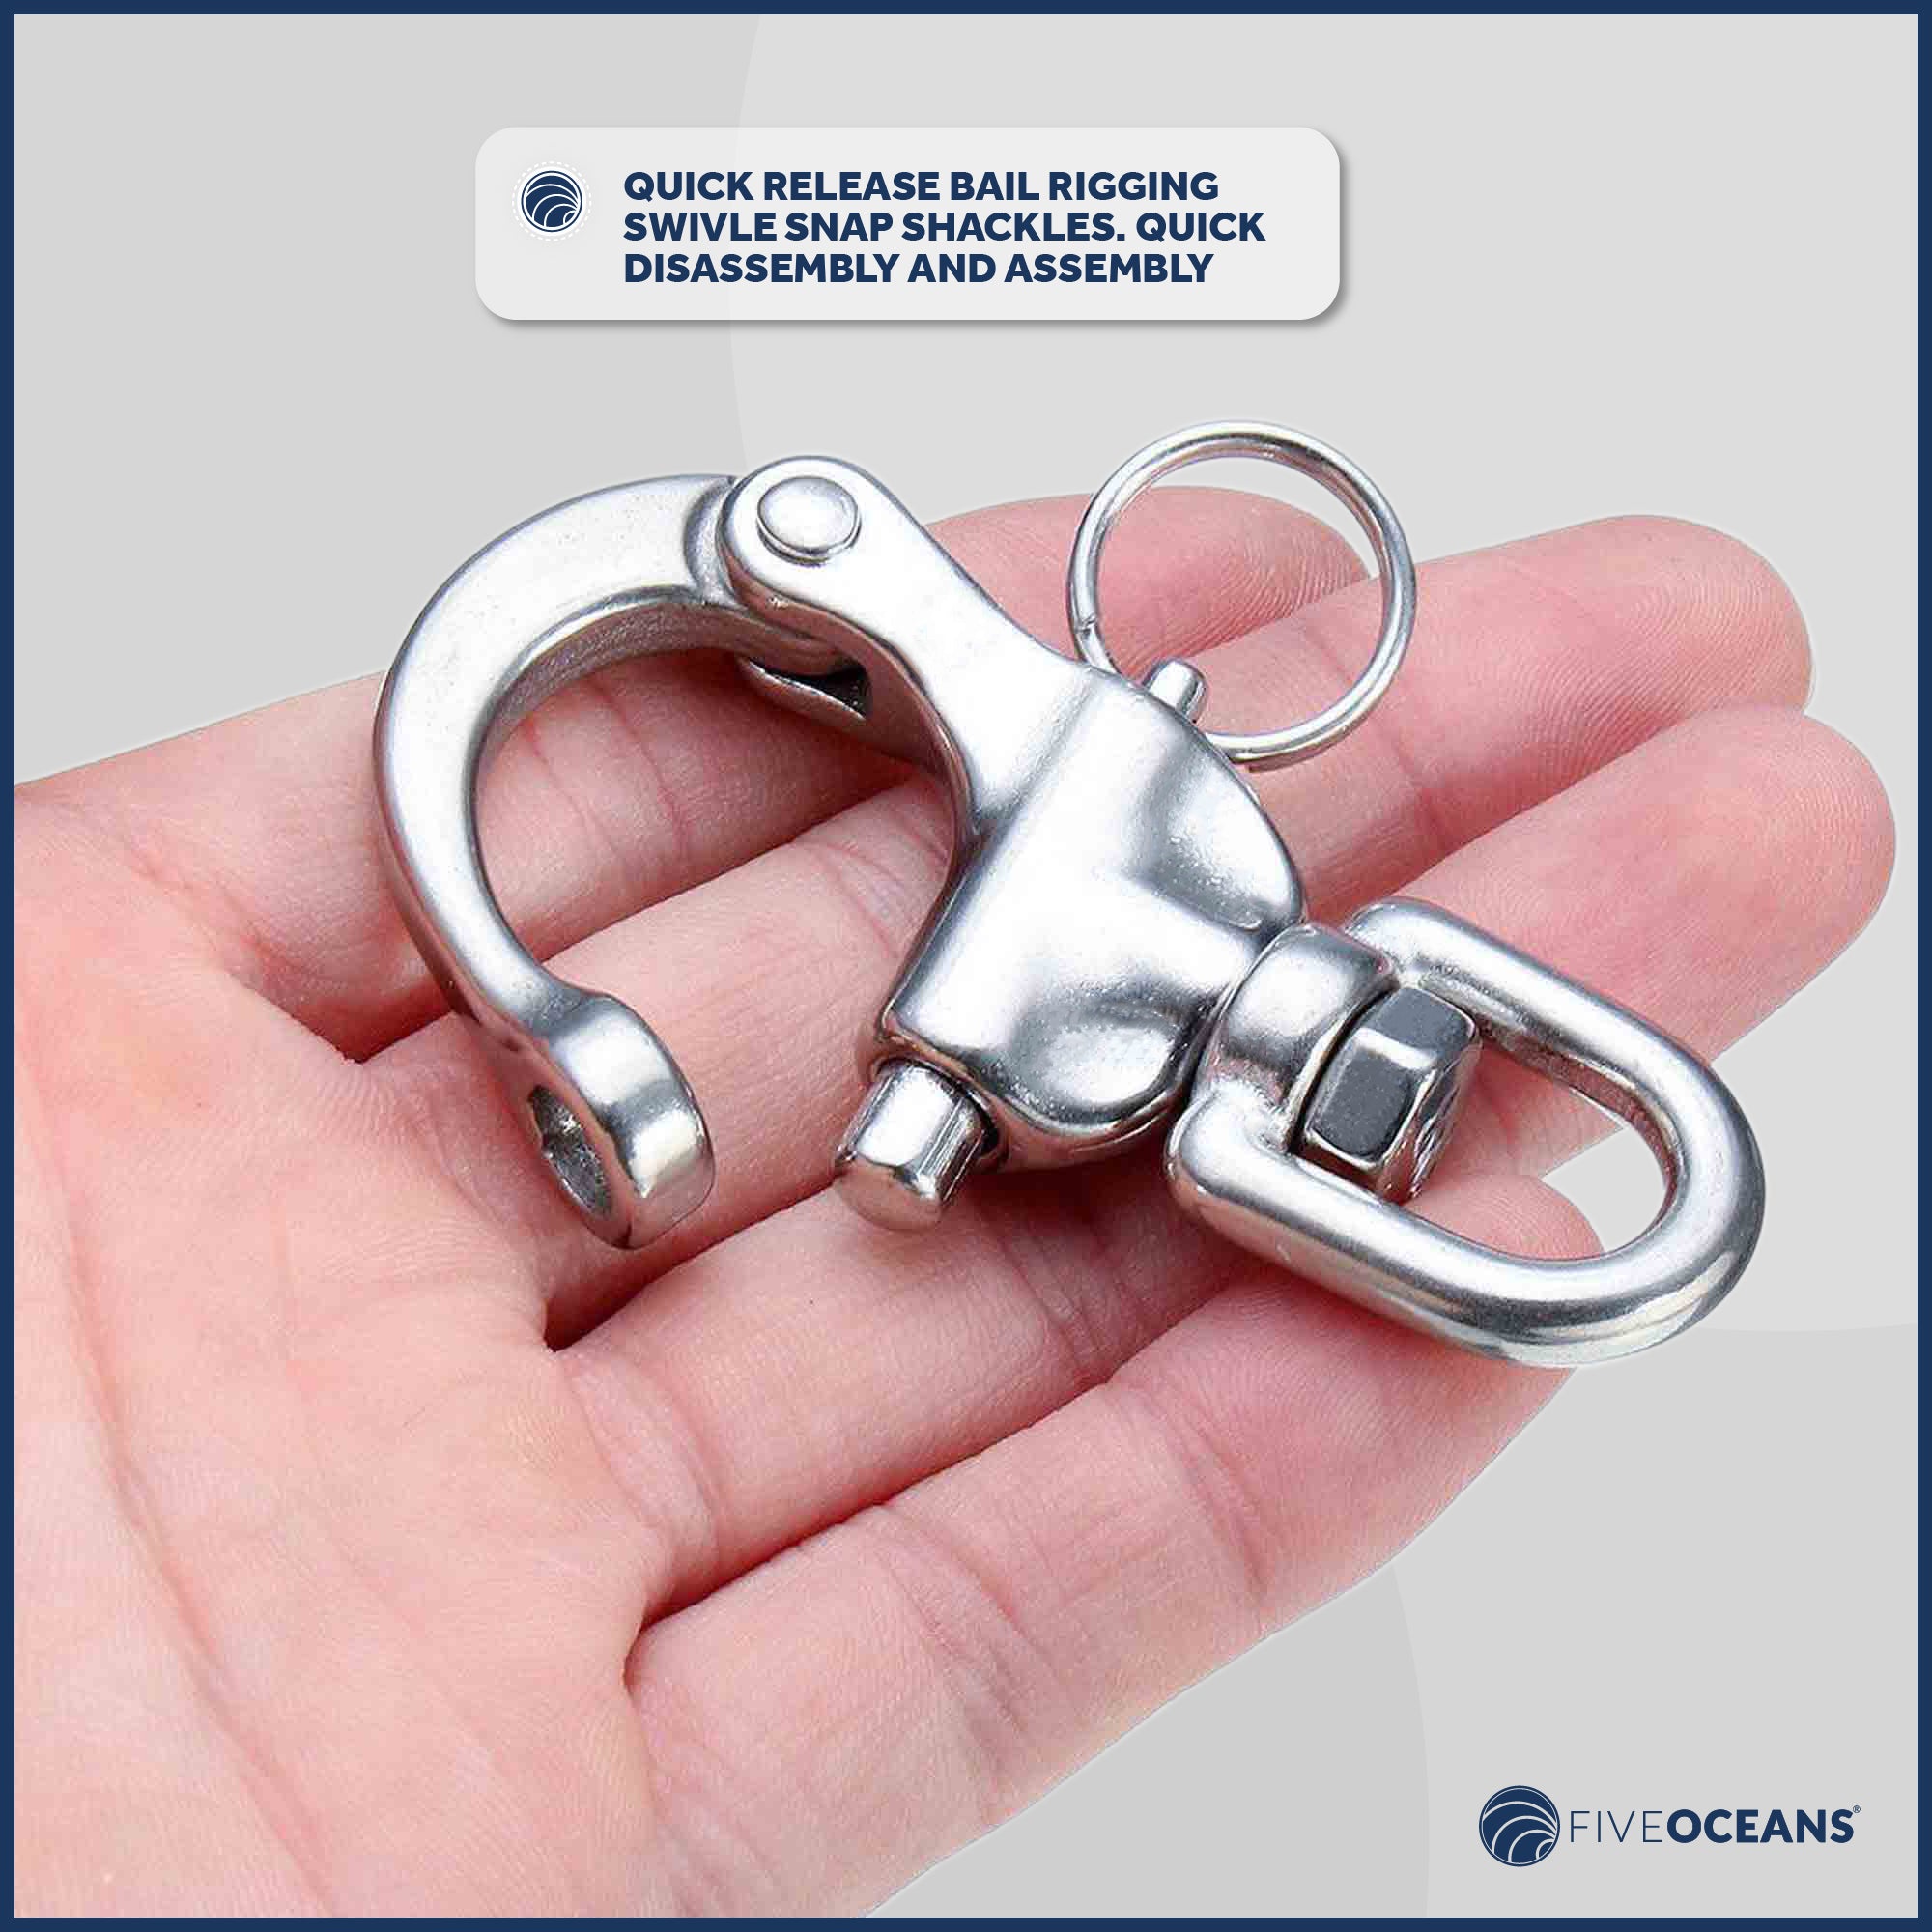 Swivel Eye Snap Shackle Quick Release Bail Rigging, 5" Stainless Steel 2-Pack - FO445-M2